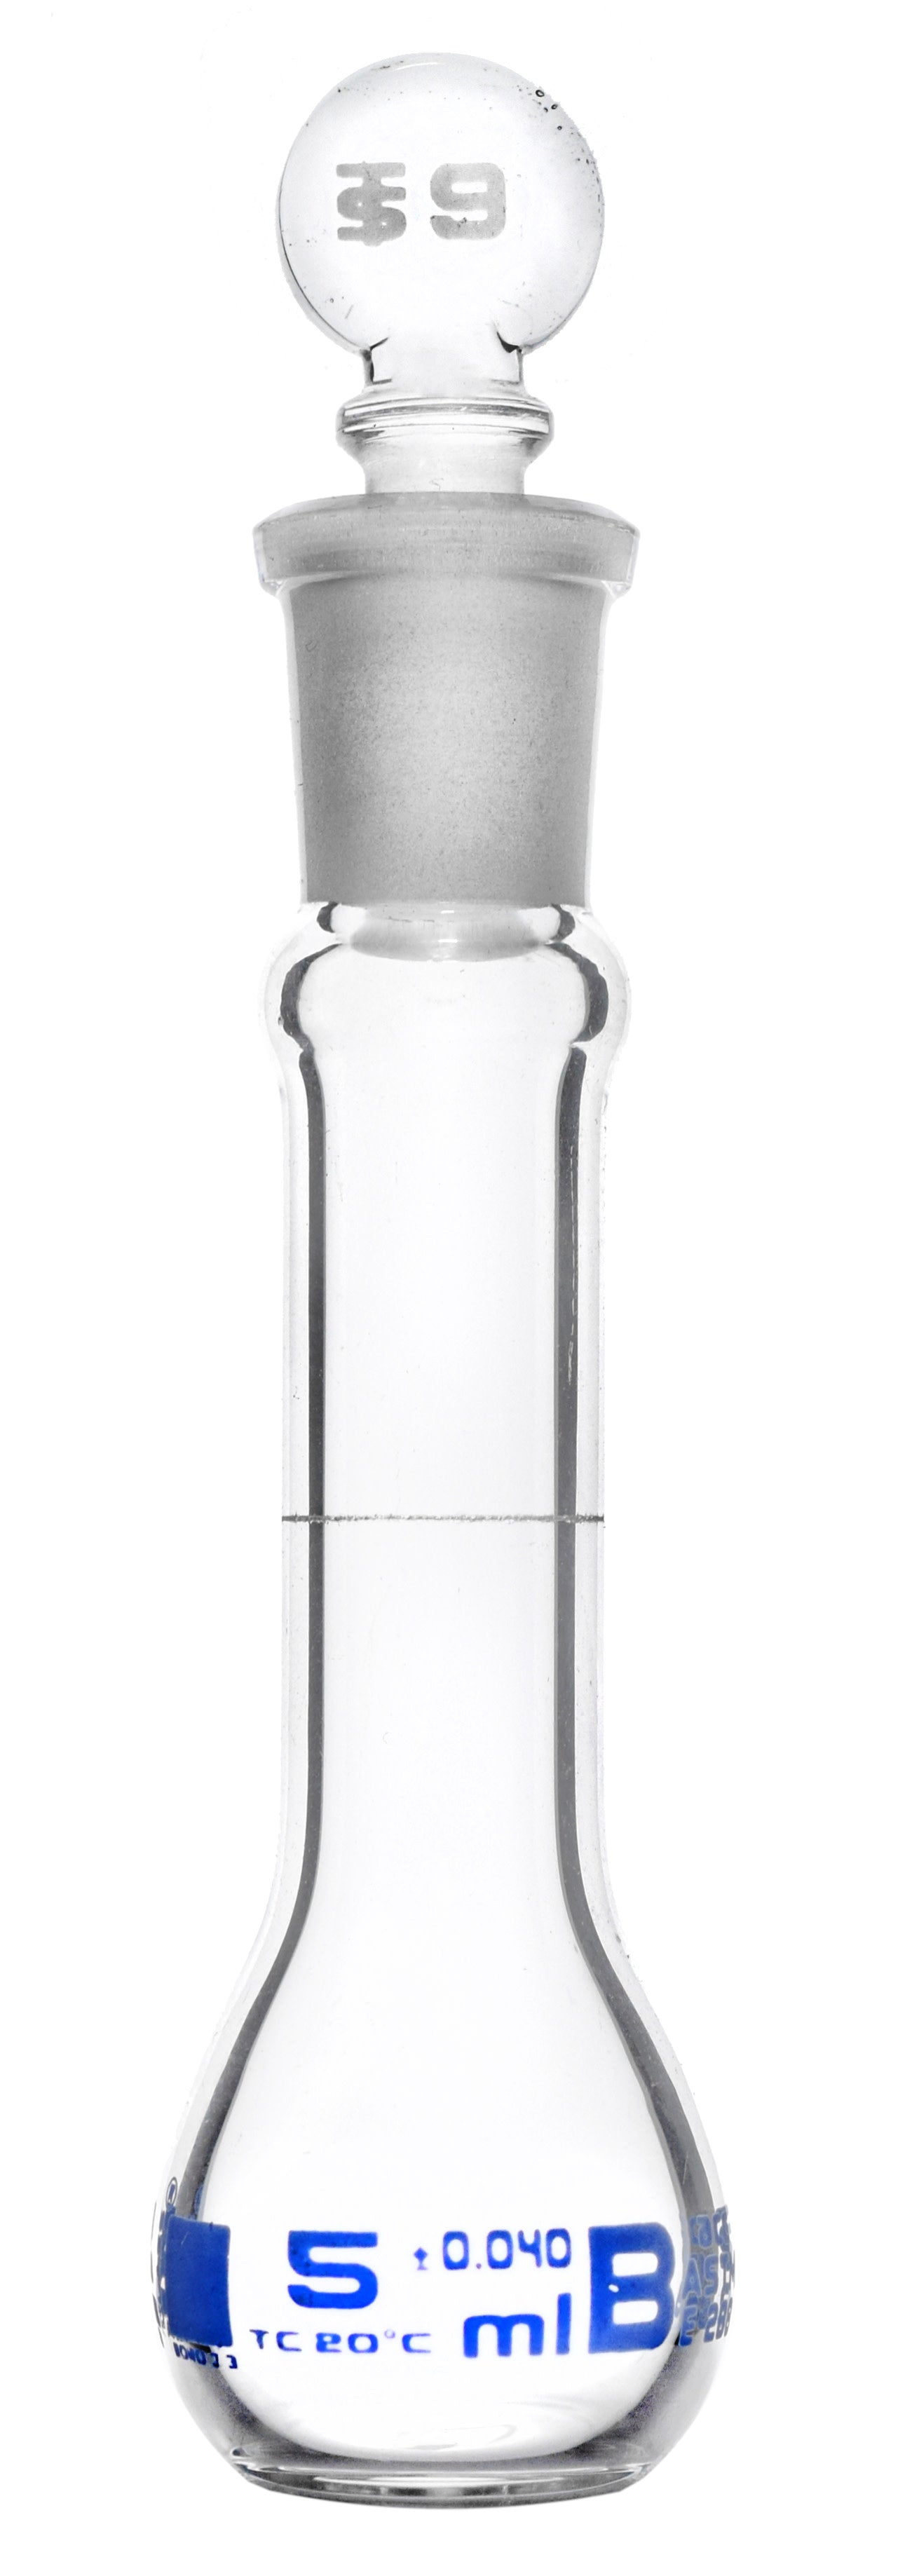 Borosilicate Glass ASTM Volumetric Flask with Glass Stopper, 5 ml, Class B, Autoclavable